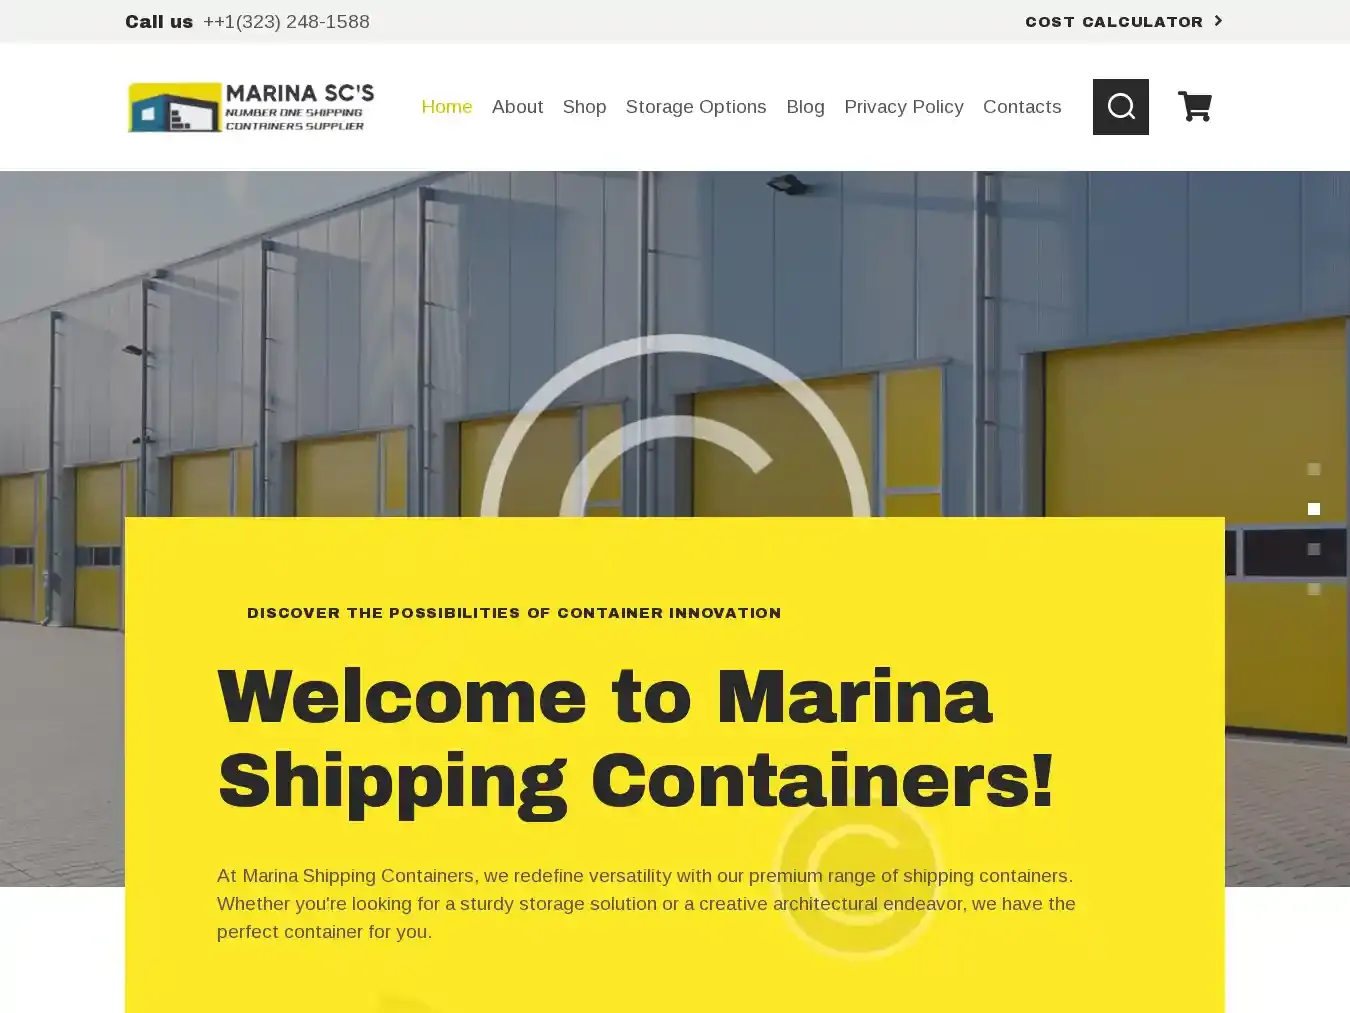 Marinashippingcontainers.com Fraudulent Container website.